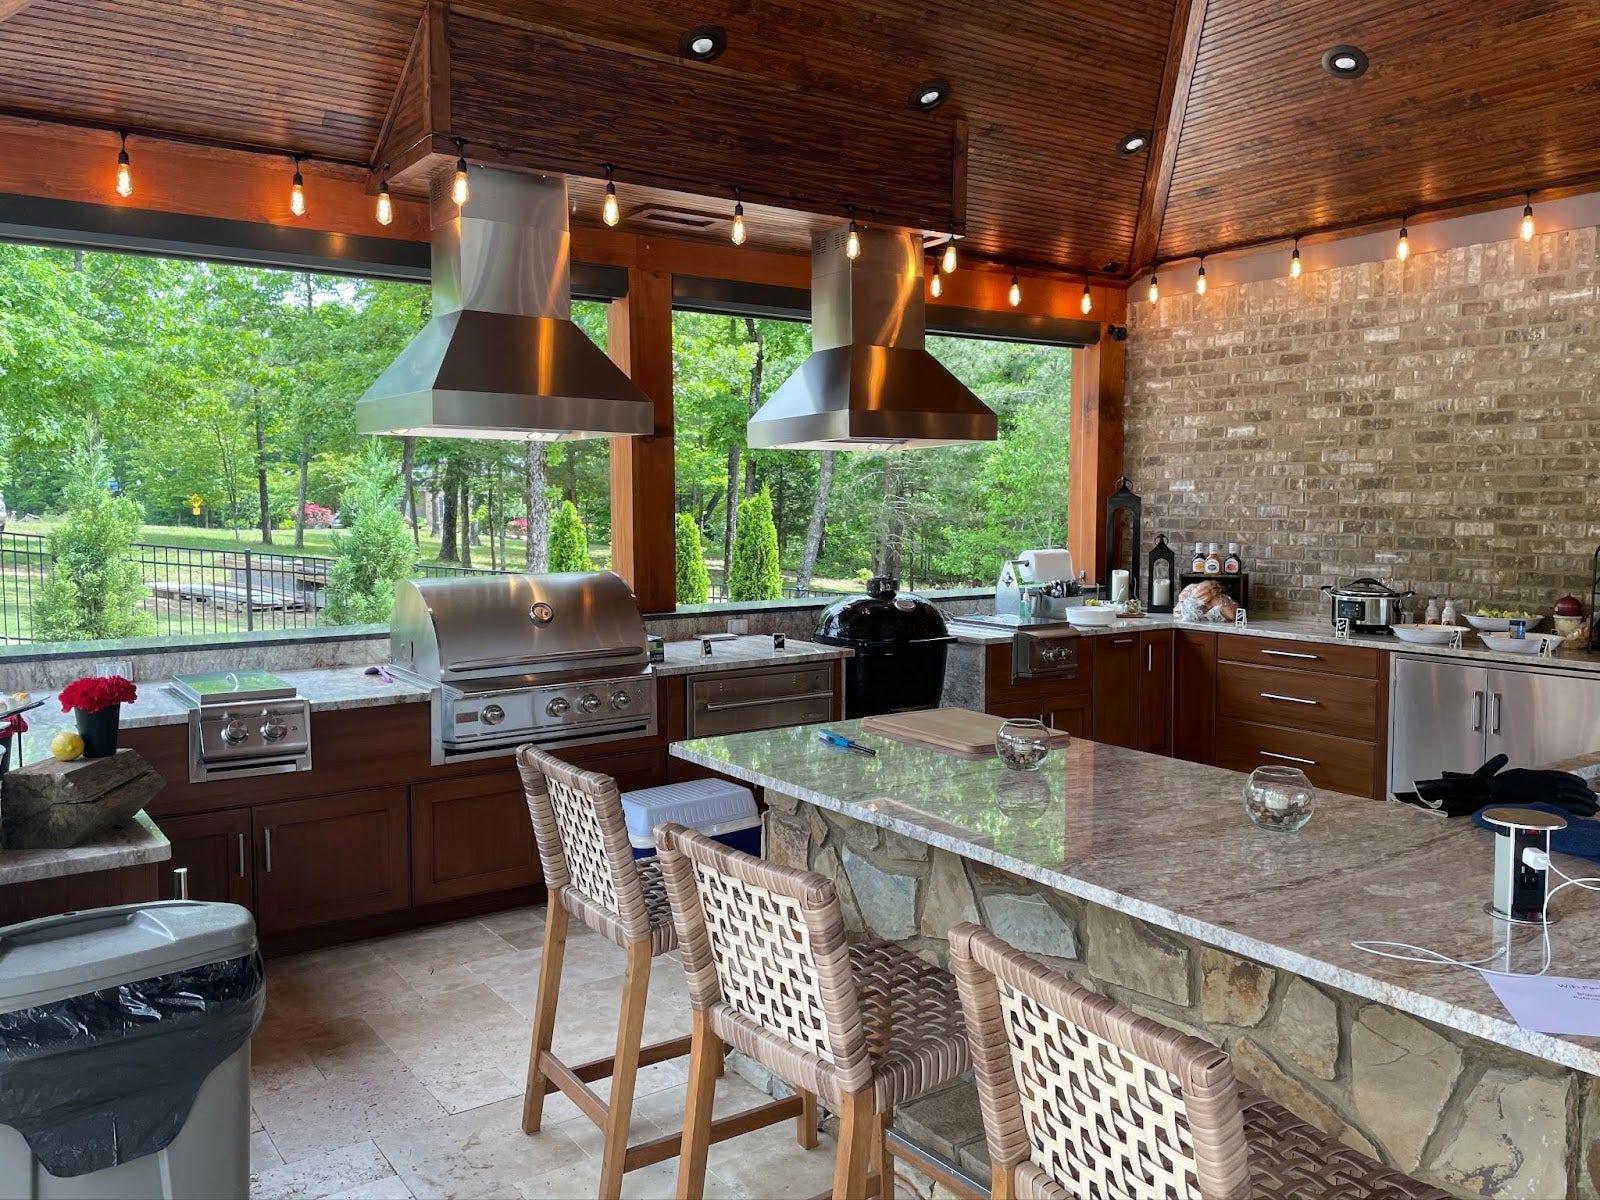 Welcoming open-air cooking space with a natural stone countertop, twin ventilation hoods, and a view of a lush backyard. - Proline Range Hoods - prolinerangehoods.com 